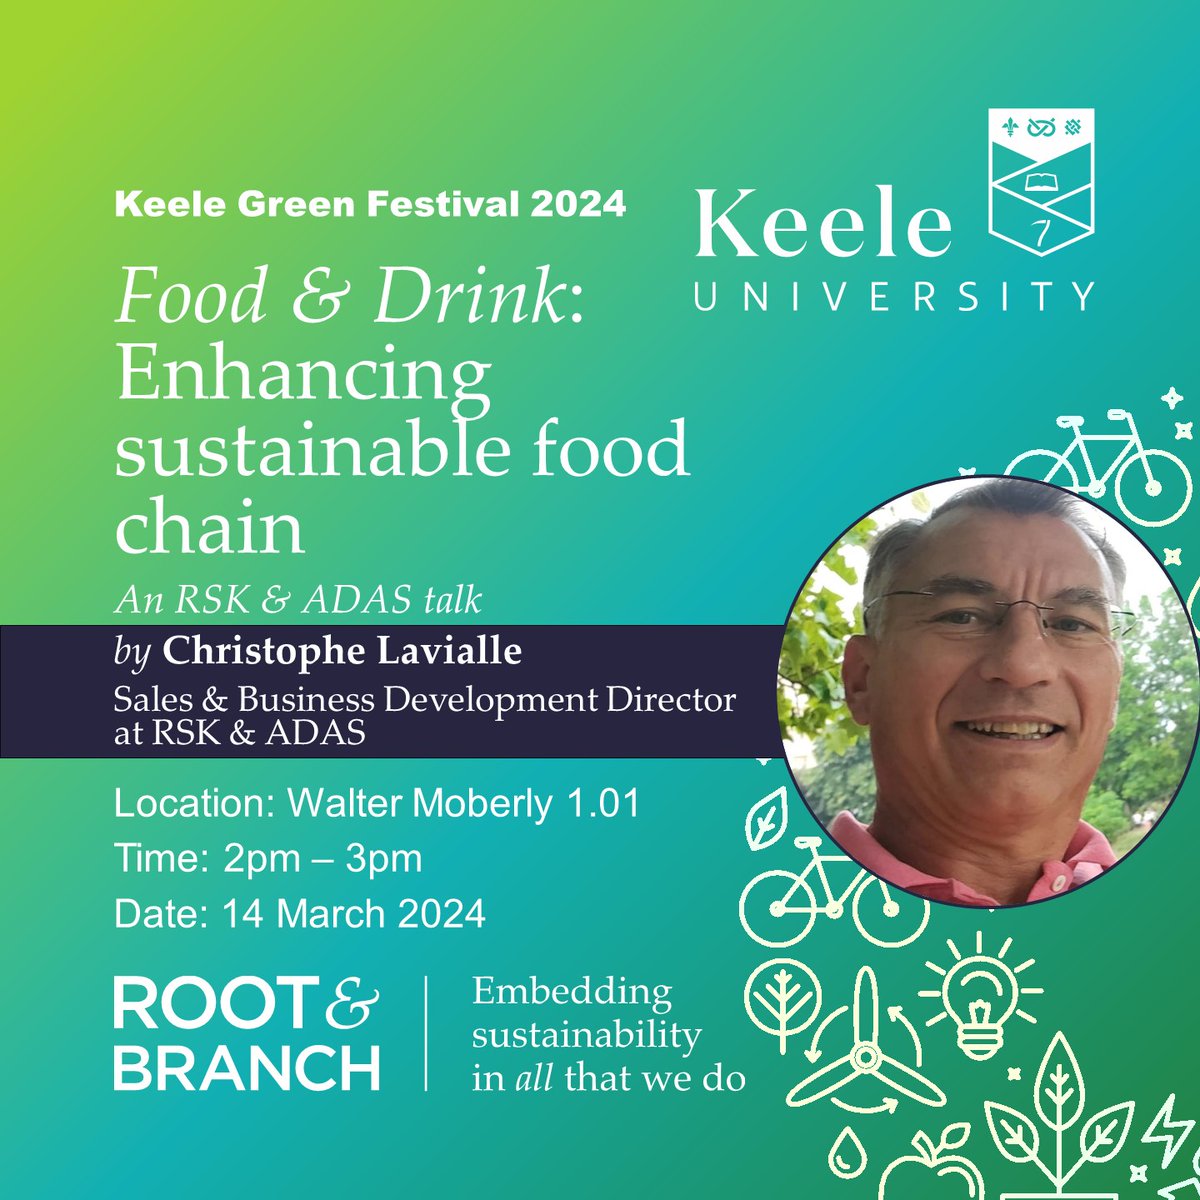 #KeeleGreenFestival GUEST TALK - Food & Drink: Enhancing sustainable food chain by Christophe Lavialle, Sales & Business Development Director at RSK & ADAS When? 14th March at 2pm, Where? Walter Moberly 1.01 All welcome!